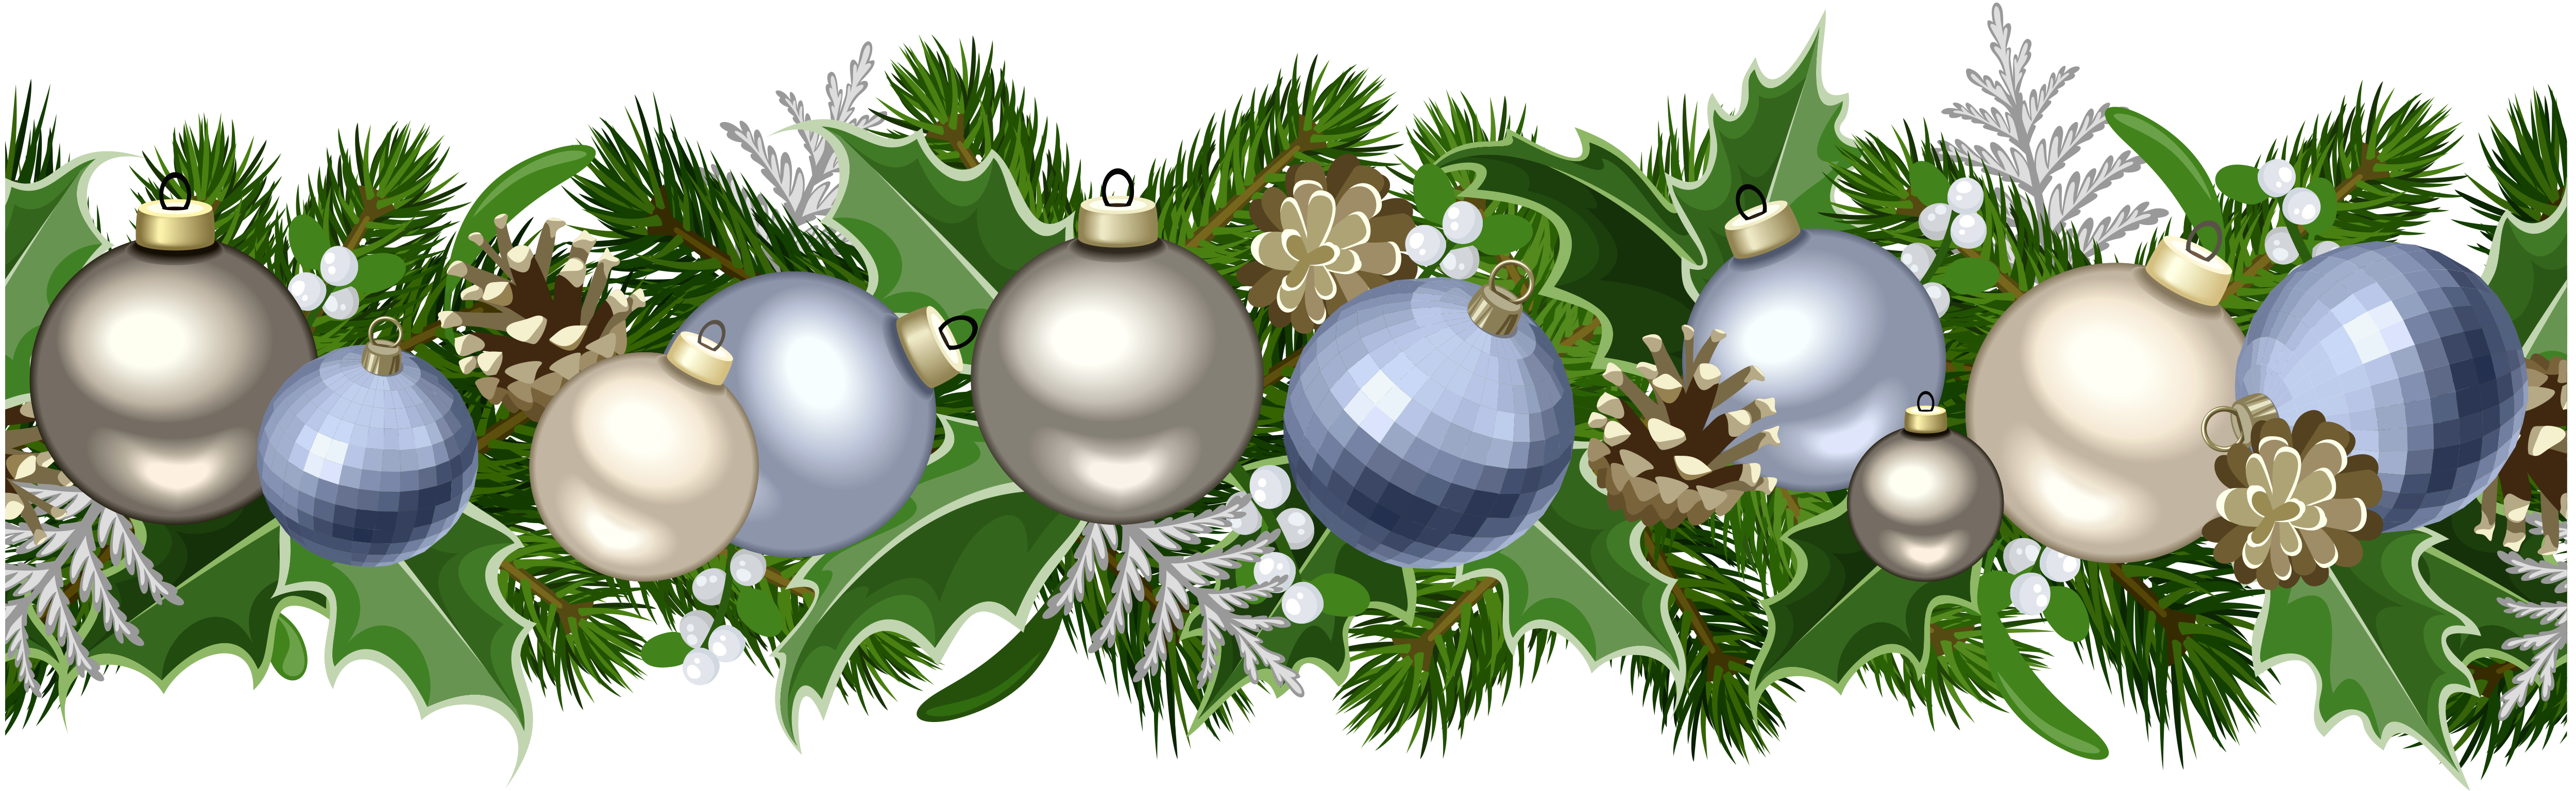 Christmas Round Garland Png Transparent Christmas Wreath With Birds Gallery Large Collections Of Hd Transparent Christmas Garland Png Images For Free Download Receh